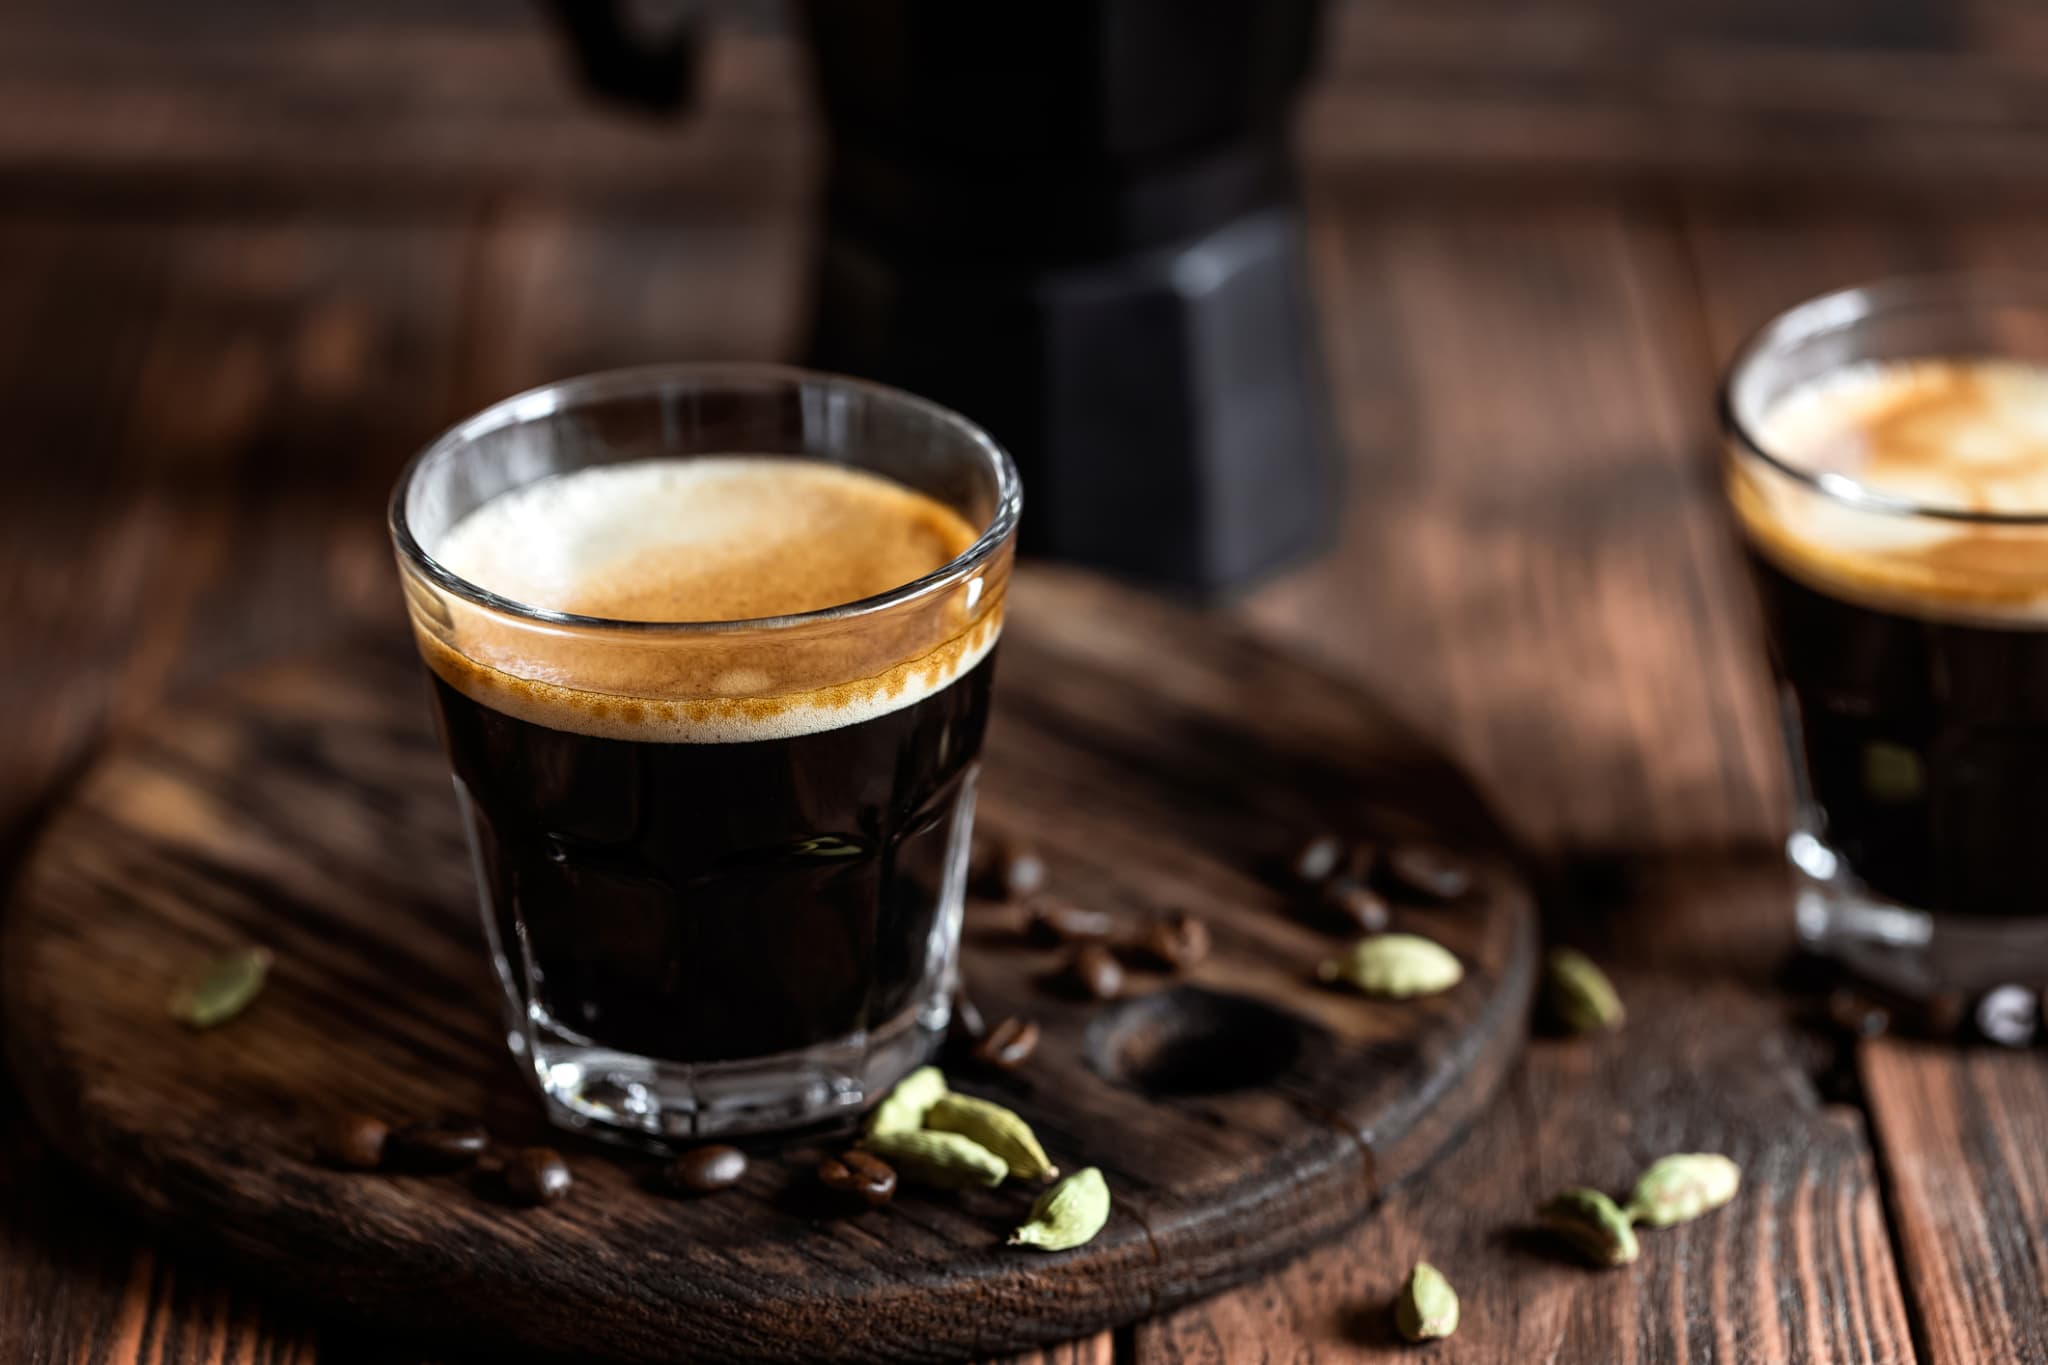 Top 10 Most Popular Espresso Drinks - A Complete Overview